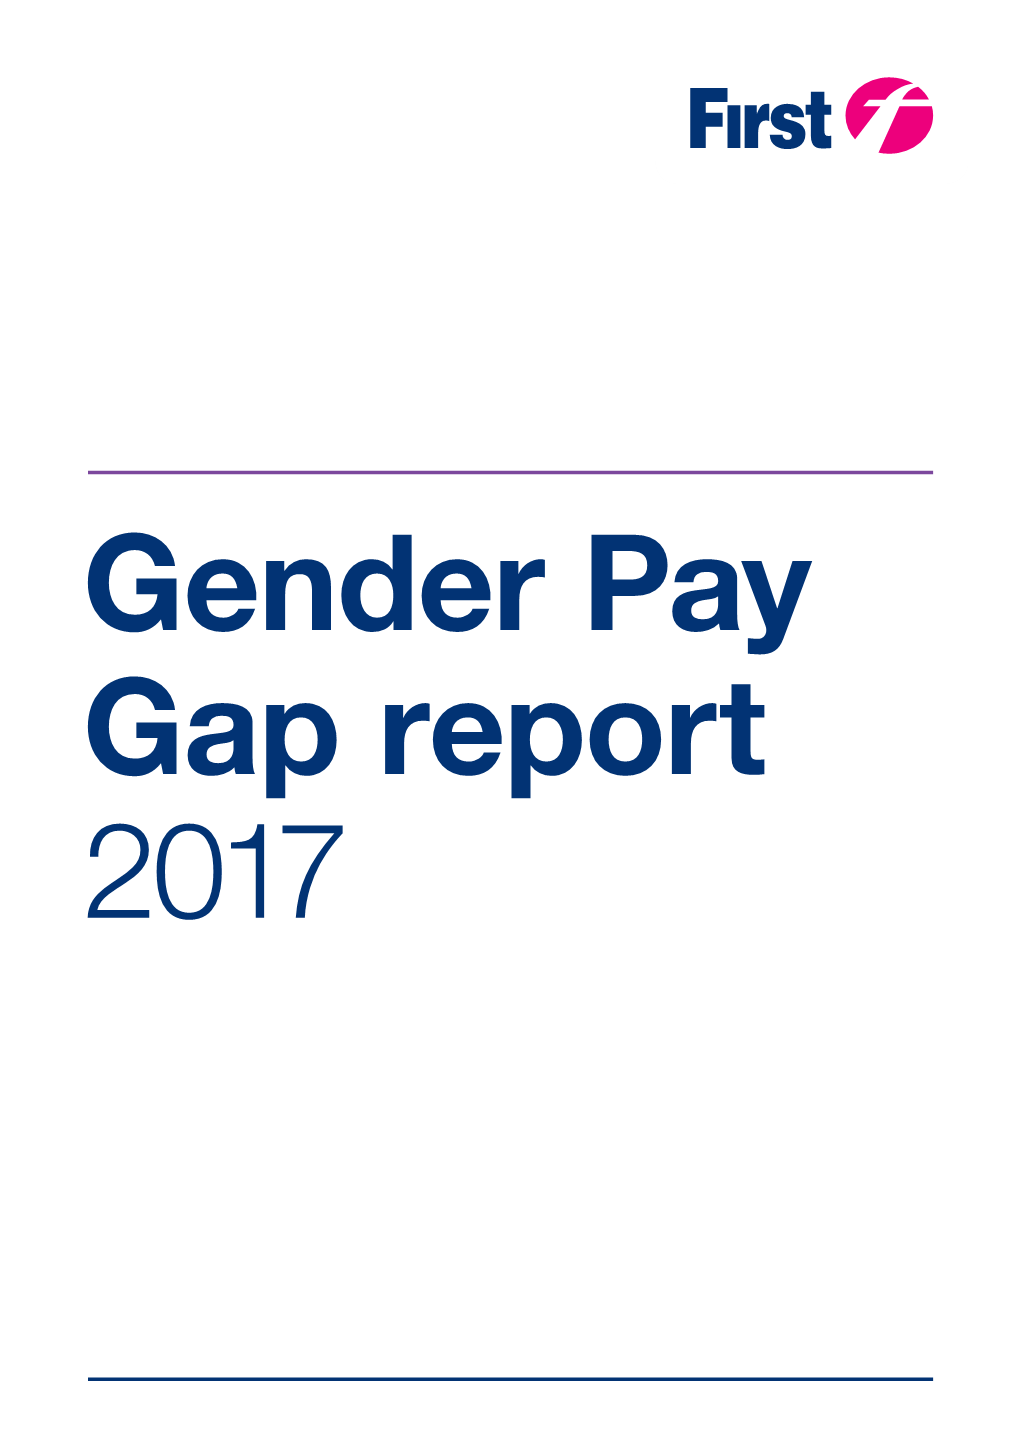 Gender Pay Gap Report 2017 Introduction Our Headline Figures